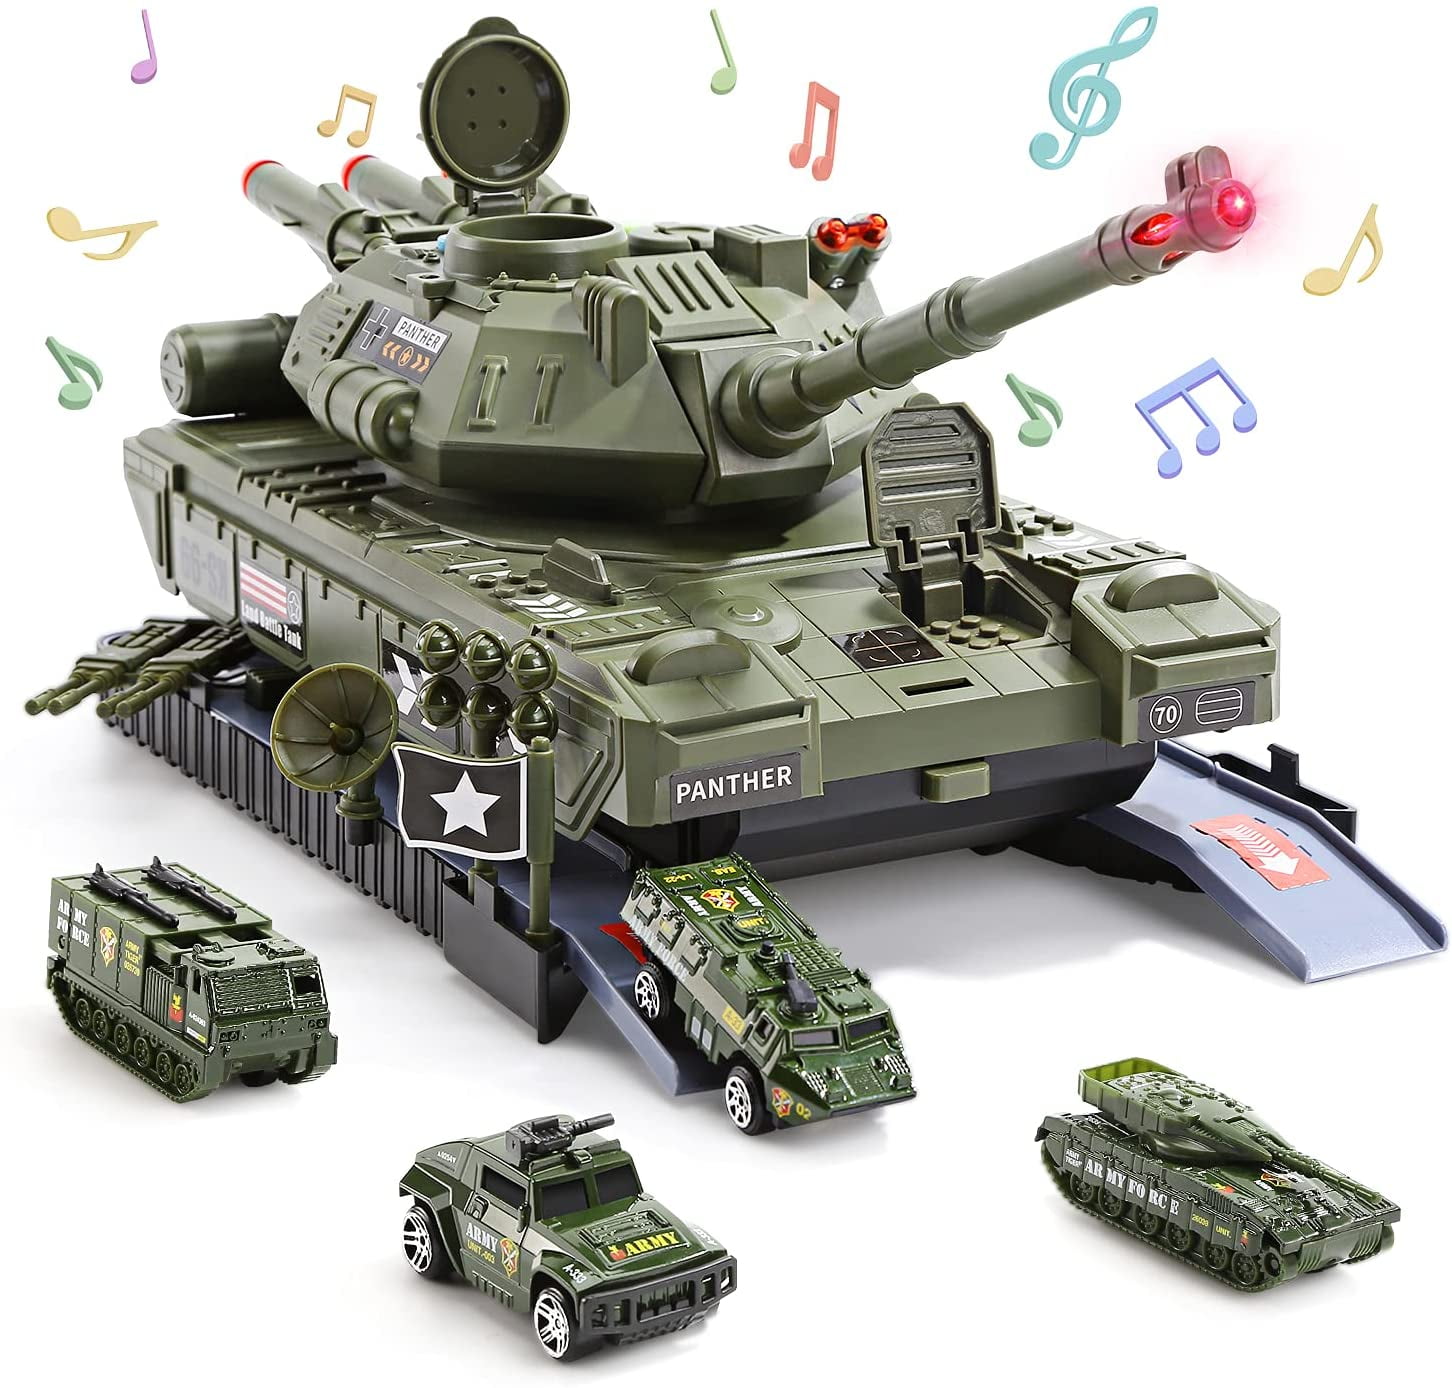 KIDS TOY ARMY TANK DIY TAKE A APART CONSTRUCTION MILITARY SOLDIER HOBBY CRAFT 